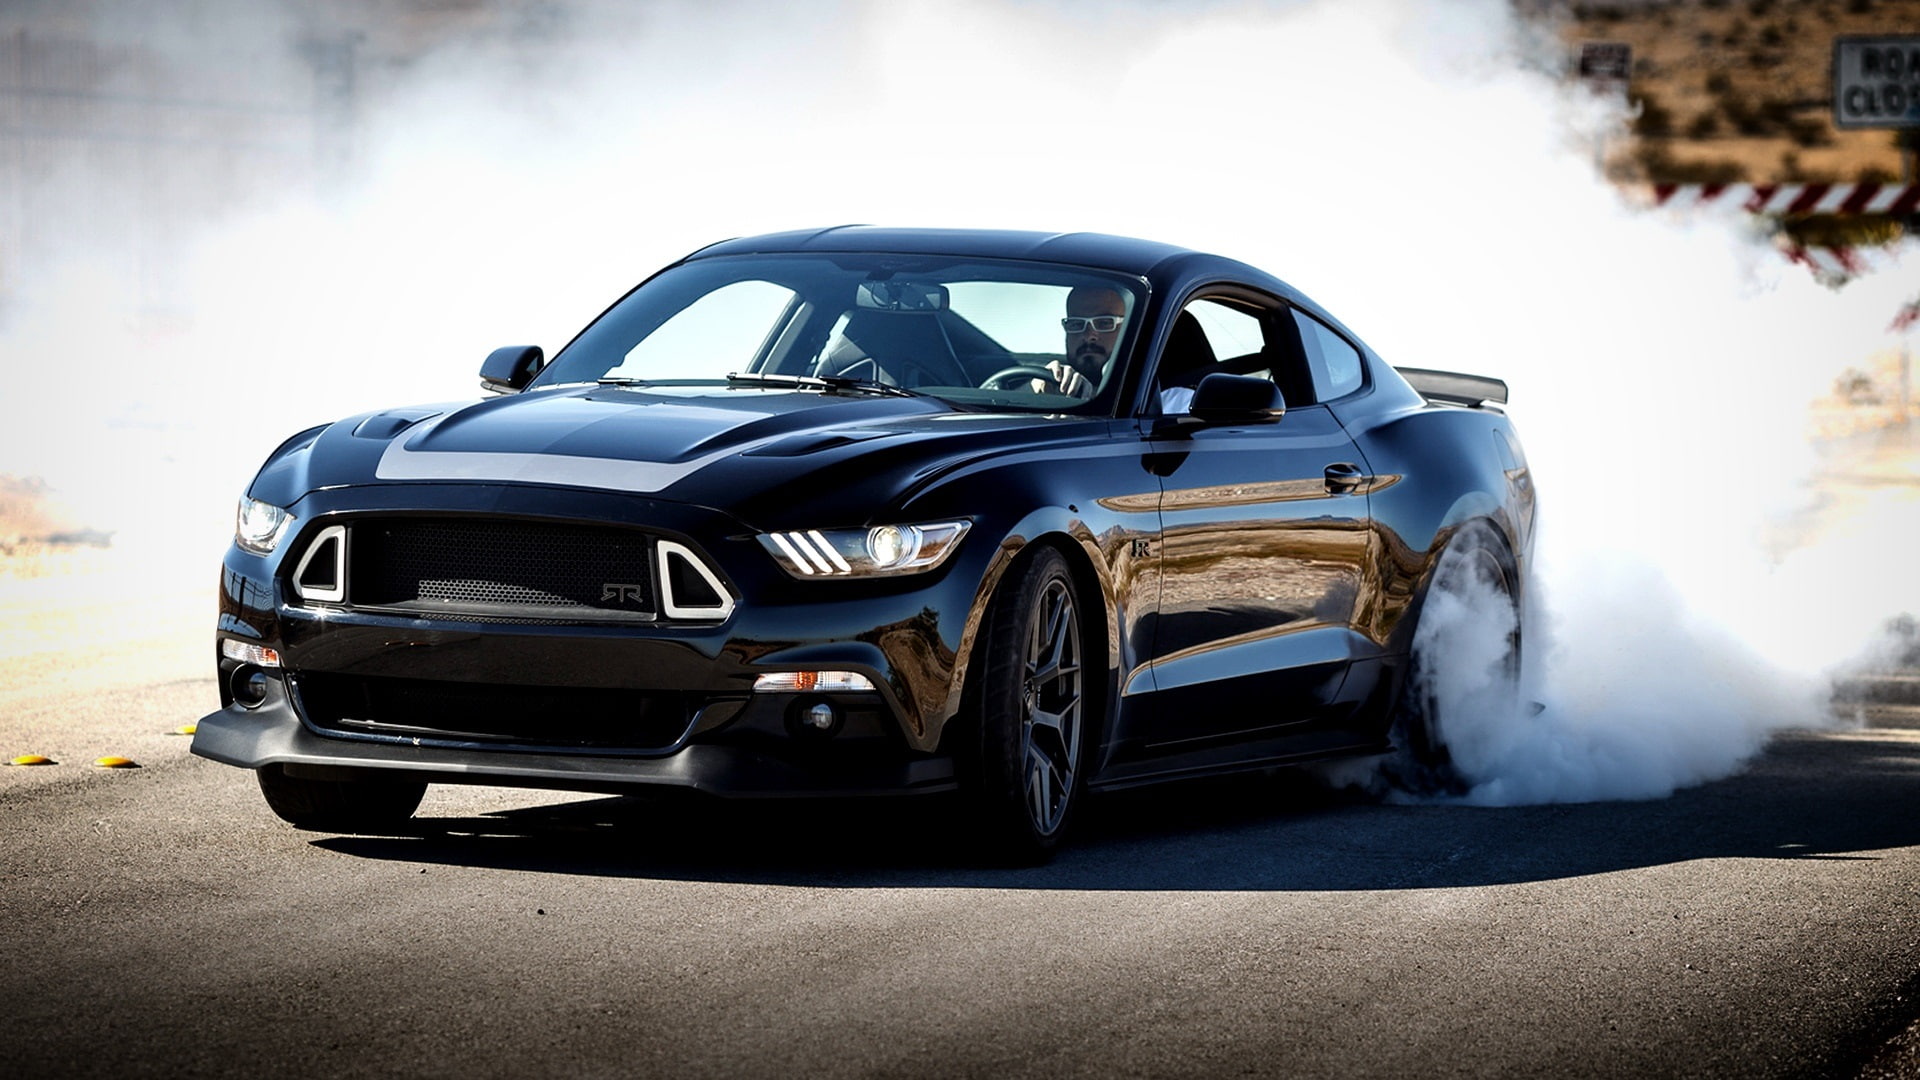 2015 Ford Mustang RTR black car, black coupe